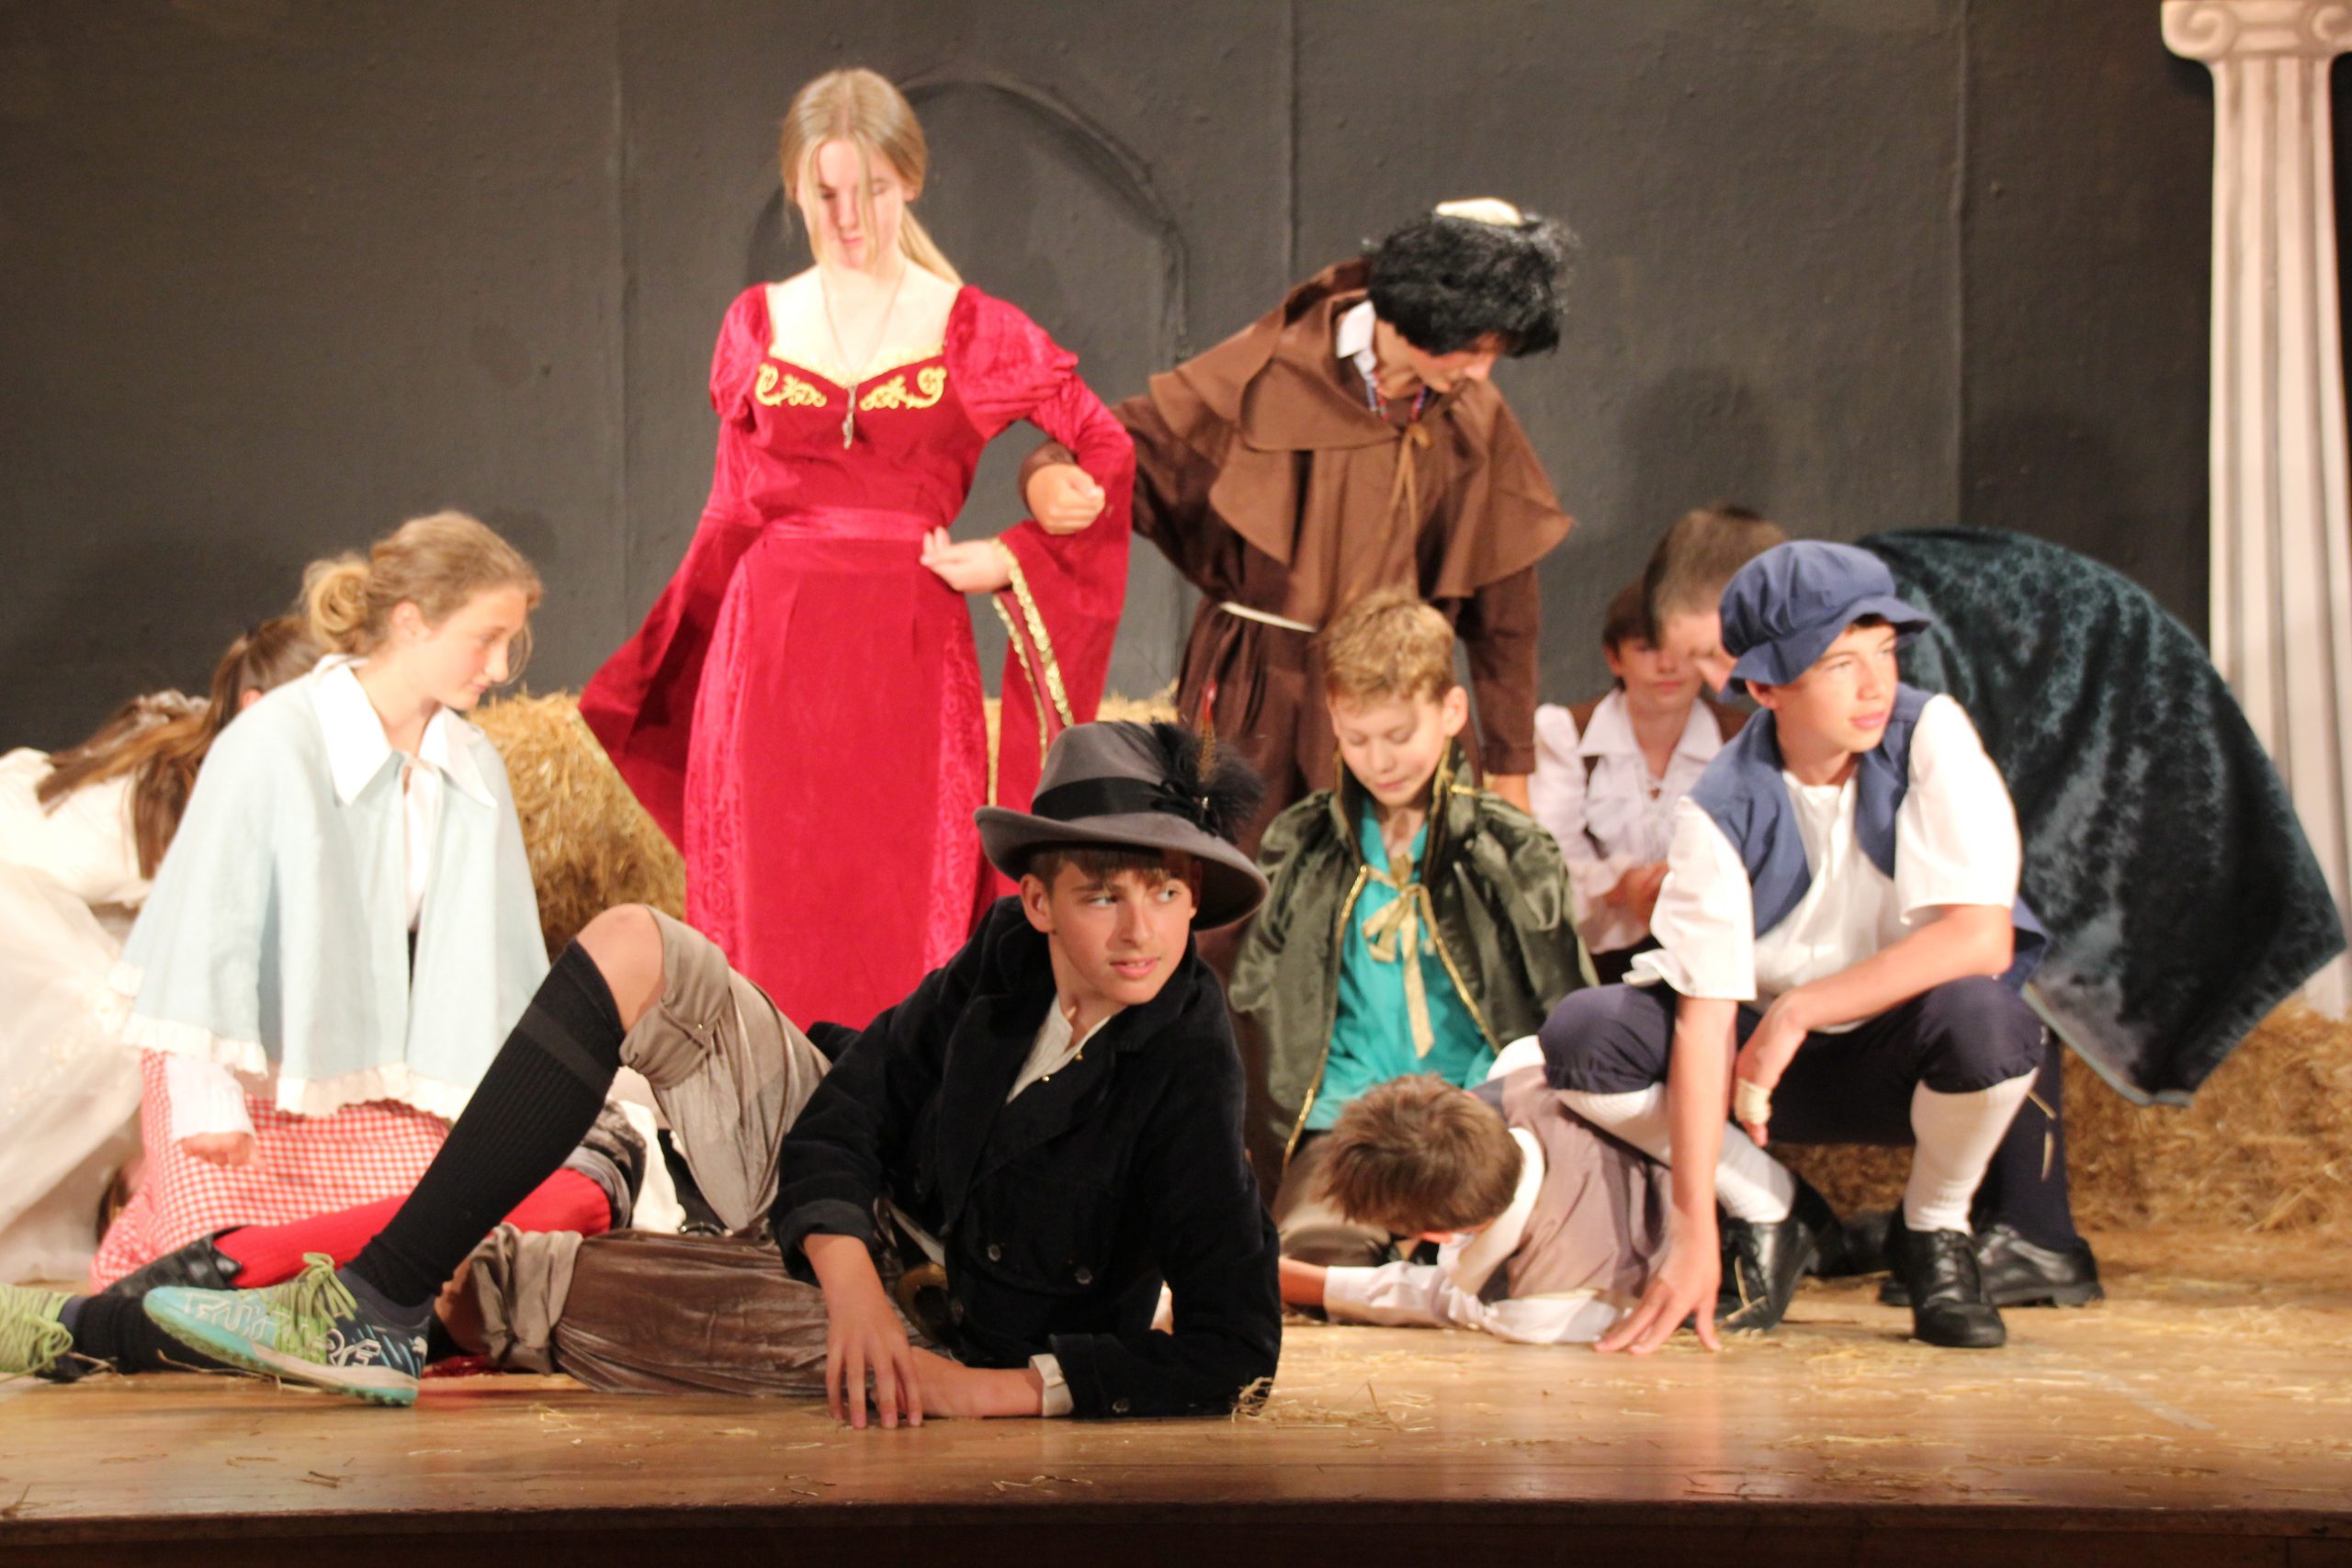 Students in Shakespeare clothing